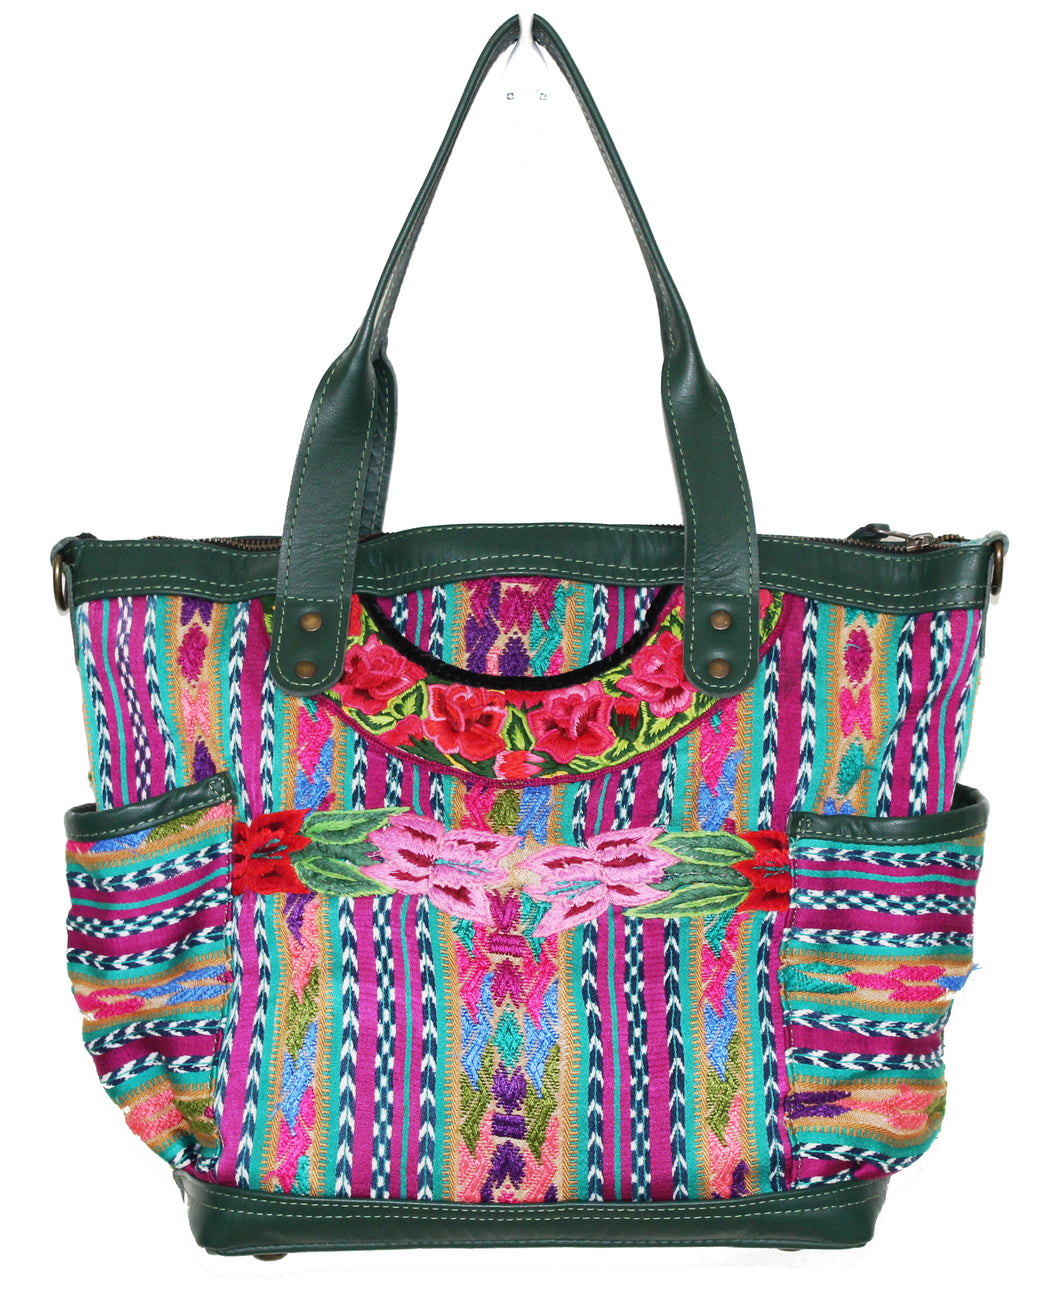 MoonLake Designs Elena medium convertbile day bag in dark green leather and handwoven floral and geometric huipil in pinks, greens, and blues